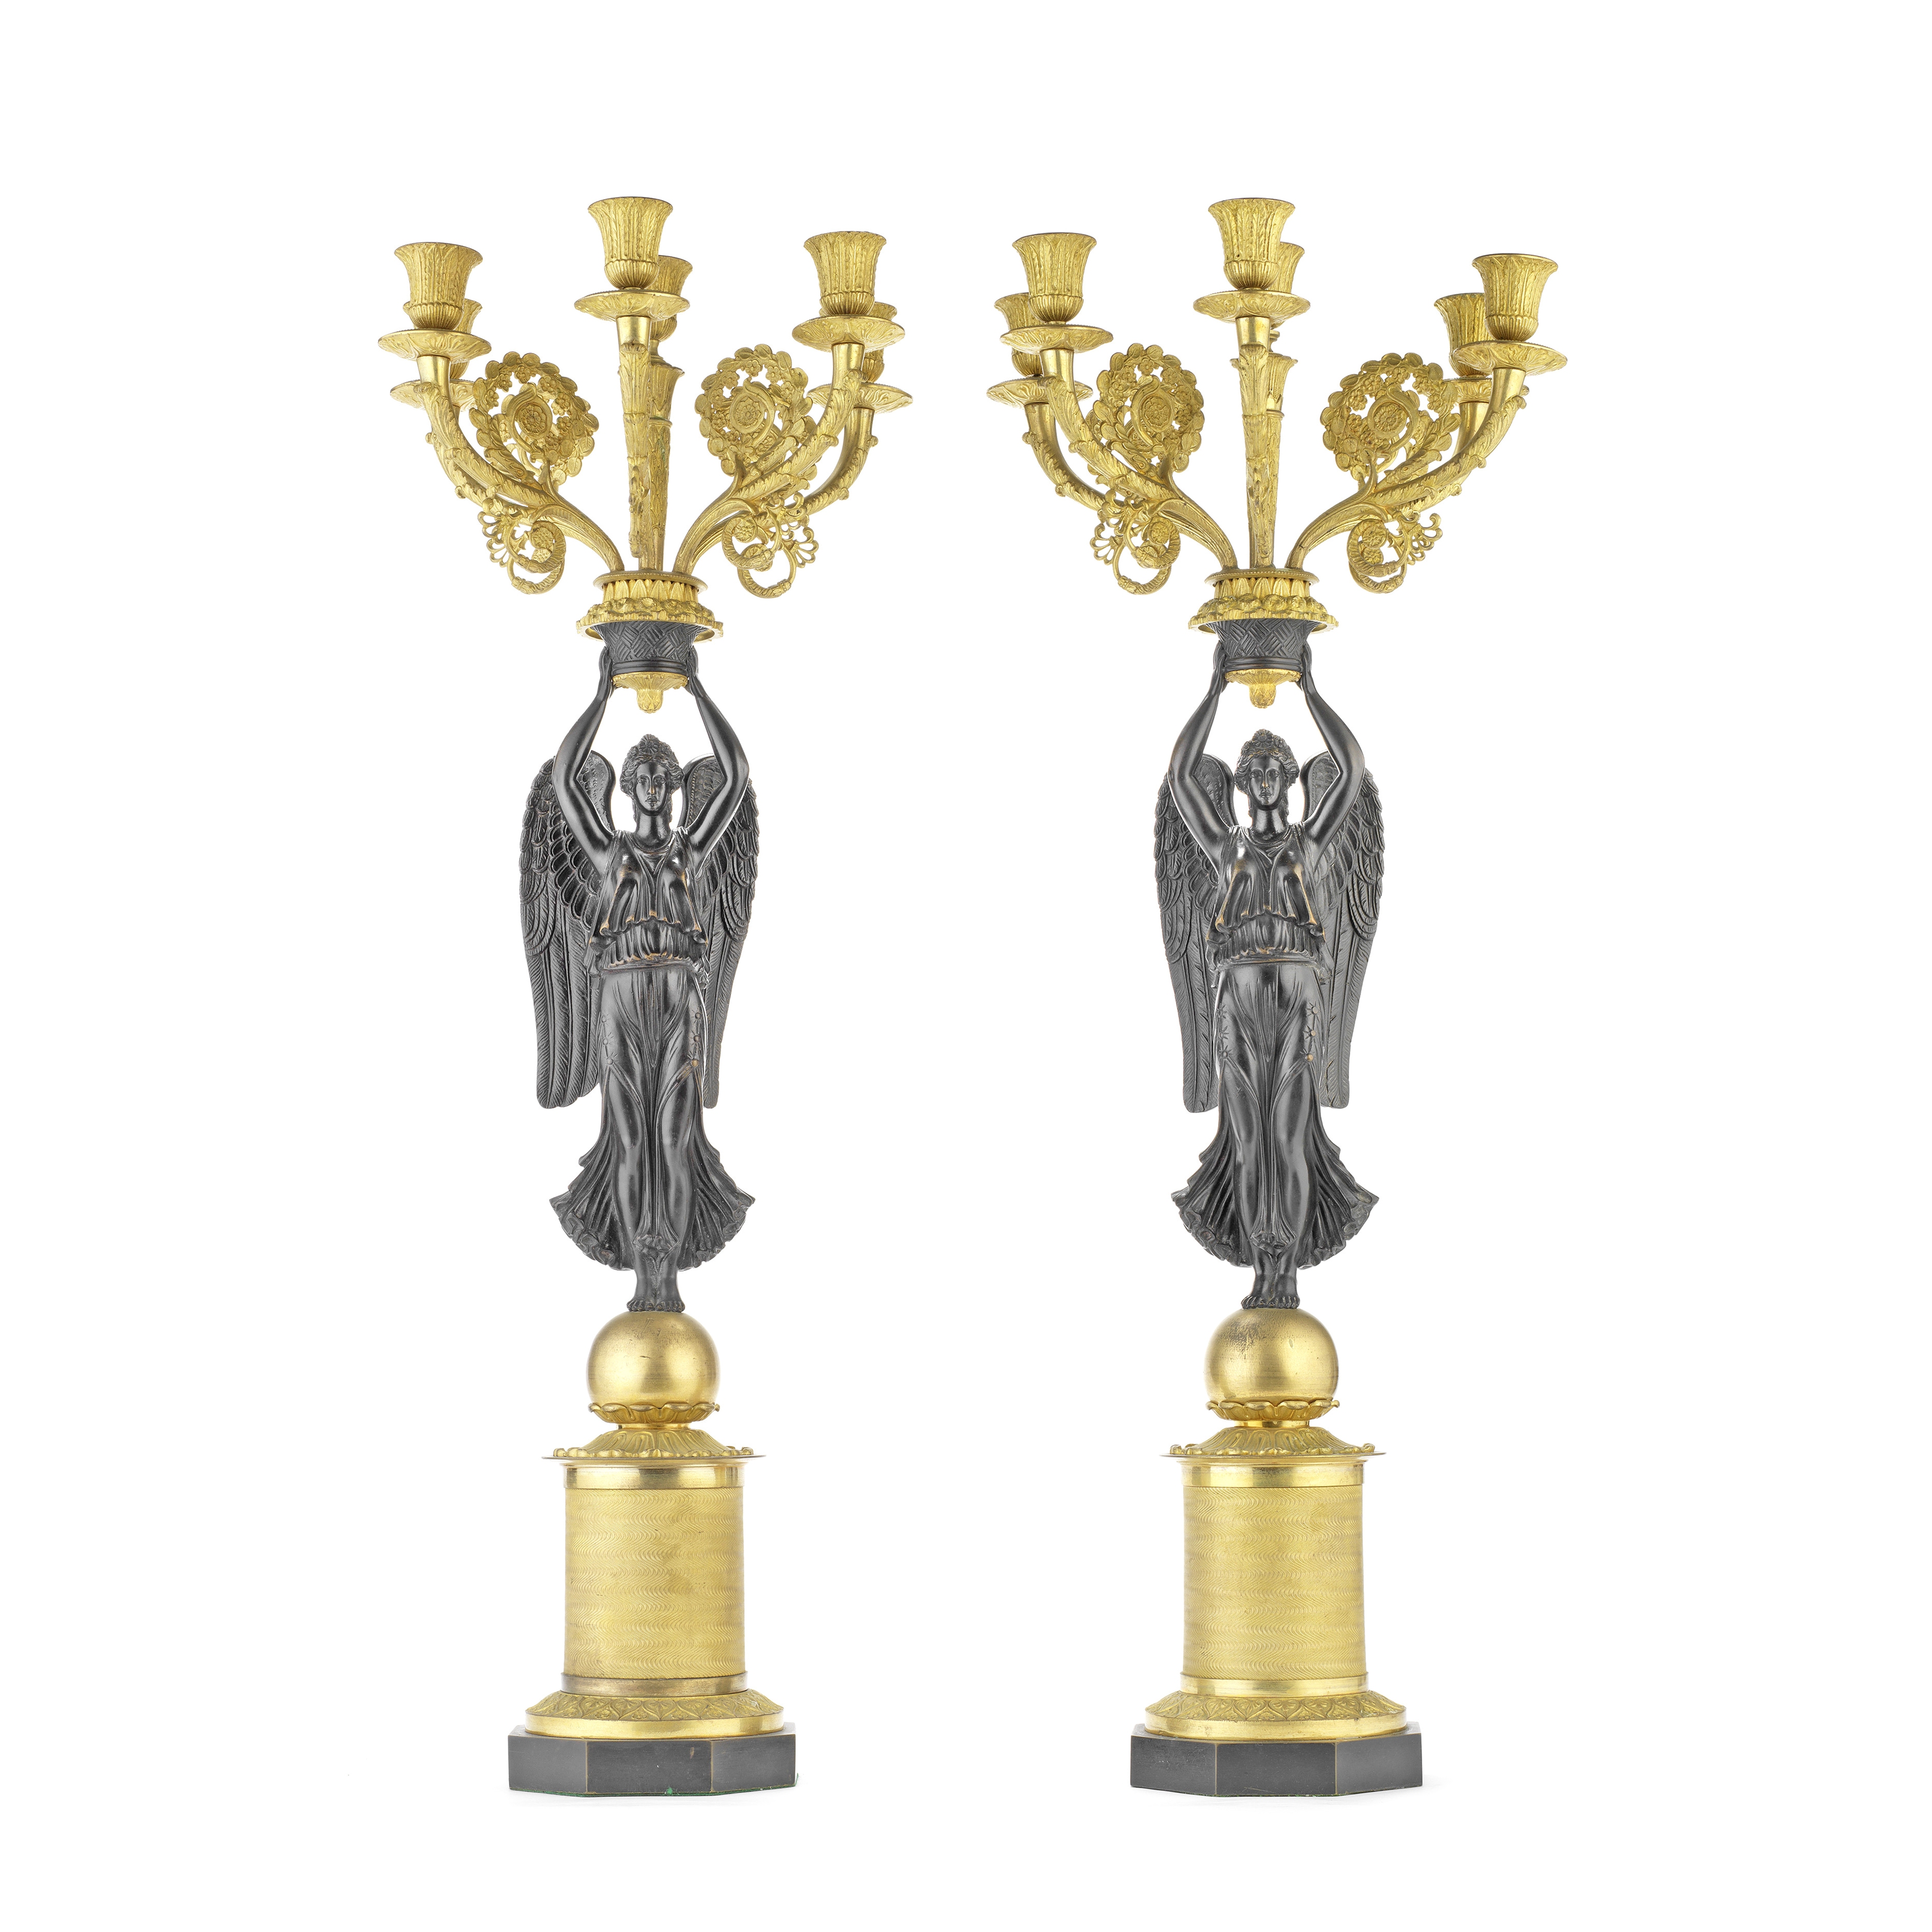 A PAIR OF 19TH CENTURY FRENCH GILT AND PATINATED BRONZE FIGURAL SIX-LIGHT CANDELABRA IN THE EMPI...